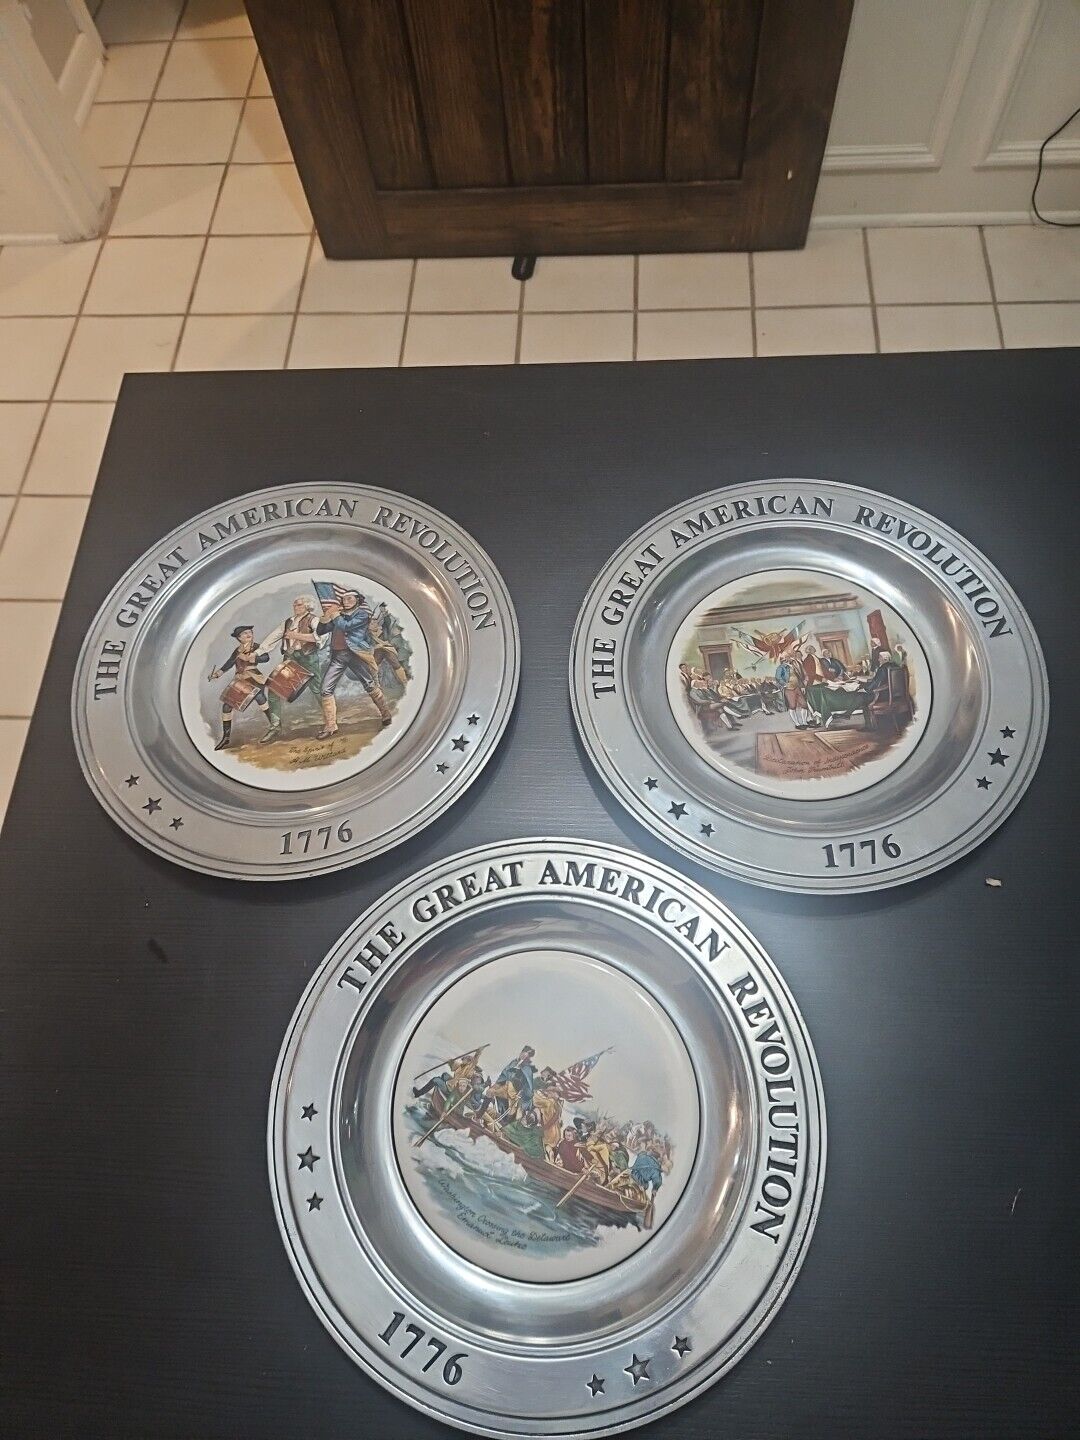 THE GREAT AMERICAN REVOLUTION 1976 PEWTER PLATES SET OF 3 CANTON OHIO 10 5/8”